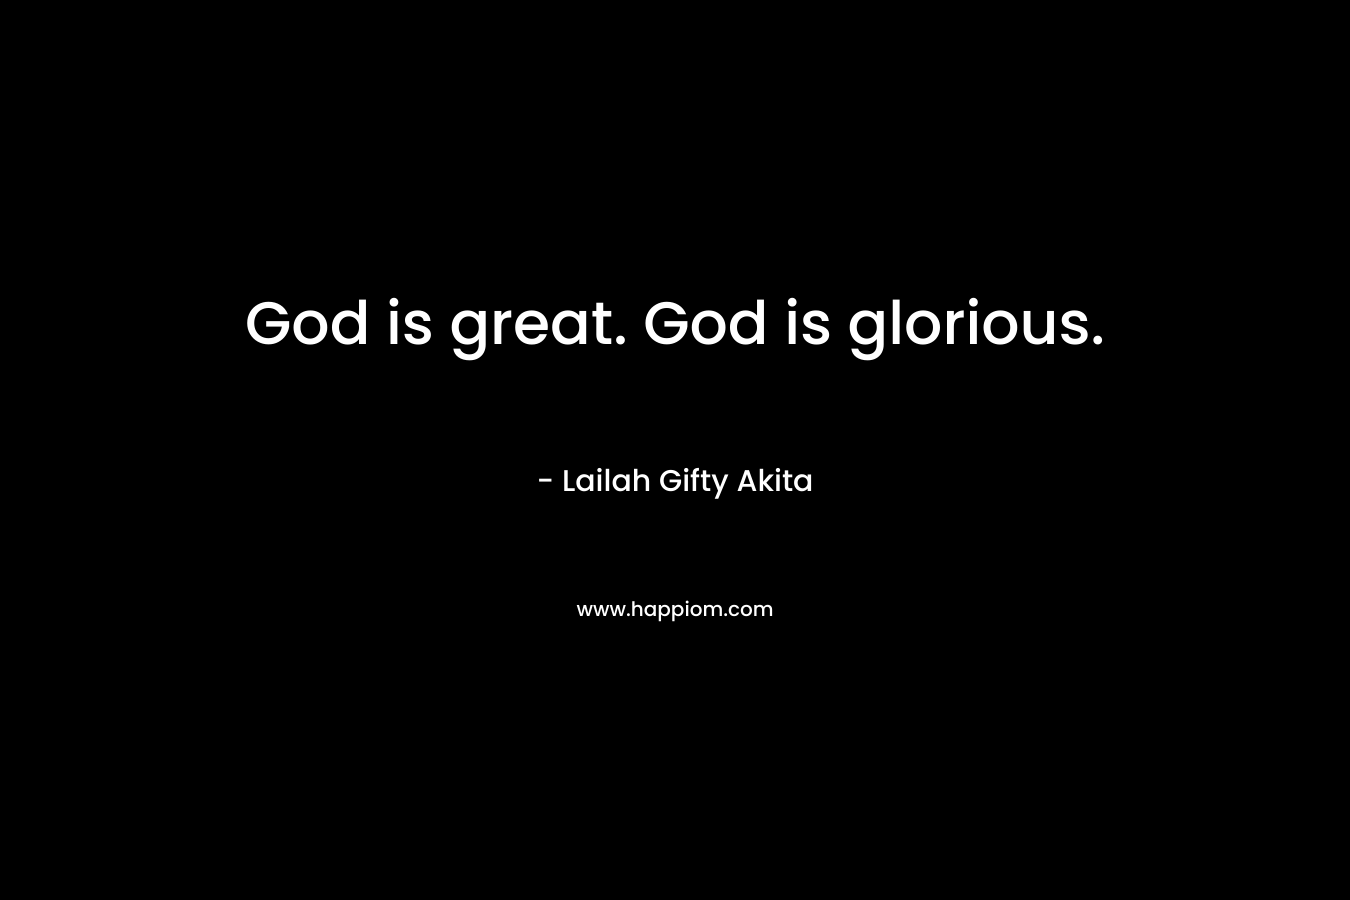 God is great. God is glorious.